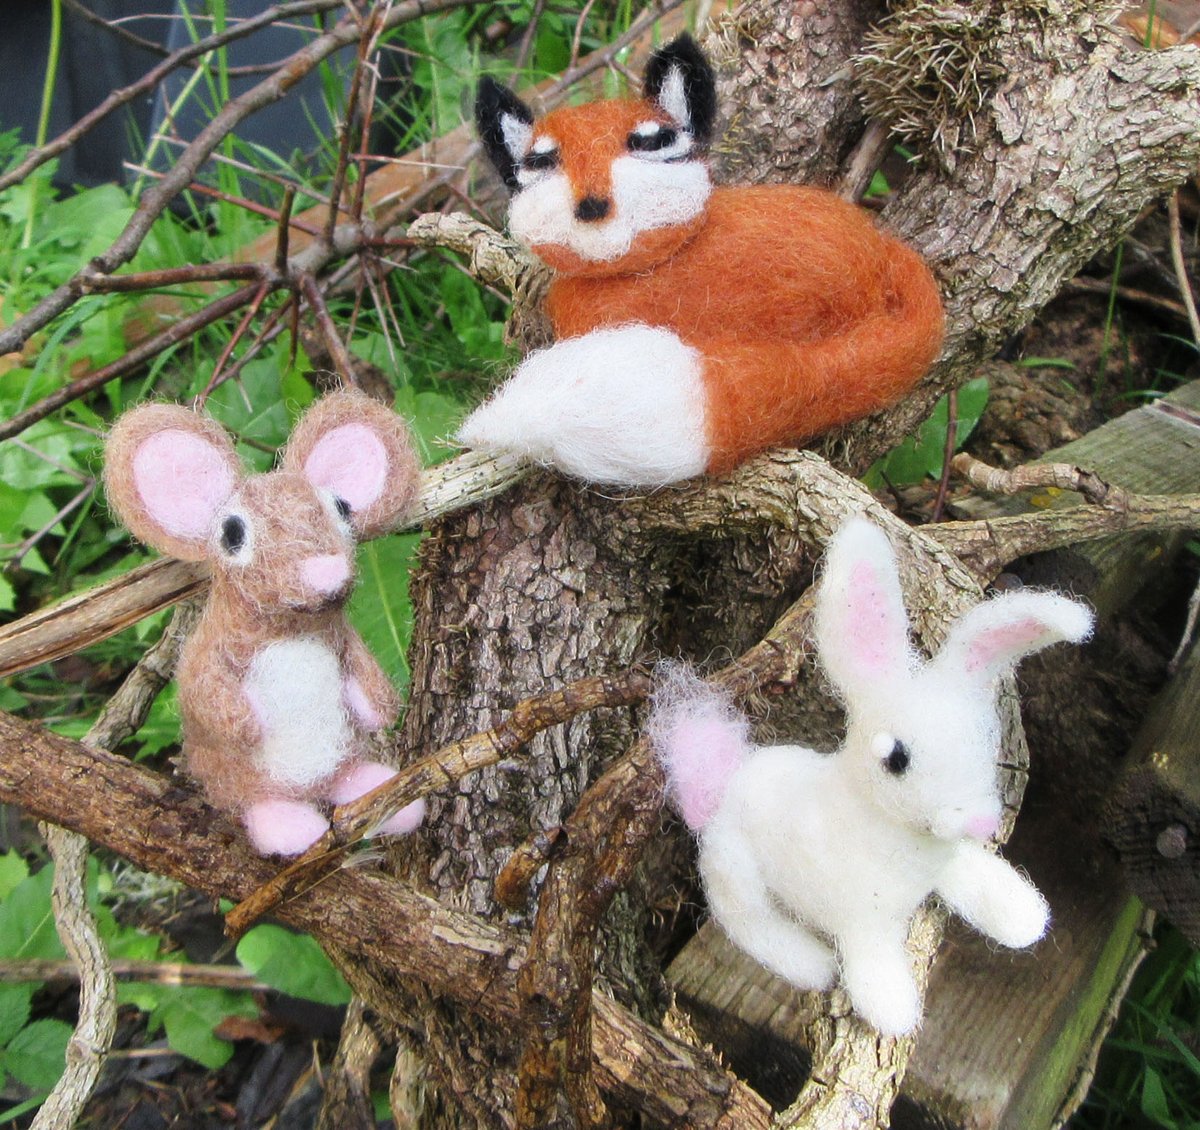 At just £8.00+PP our cute needle felting kits are the cheapest around. With simple to understand instruction they are ideal for beginners In all our kits we only use the best quality British wool. Find a link to our shop in my bio. #earlybiz